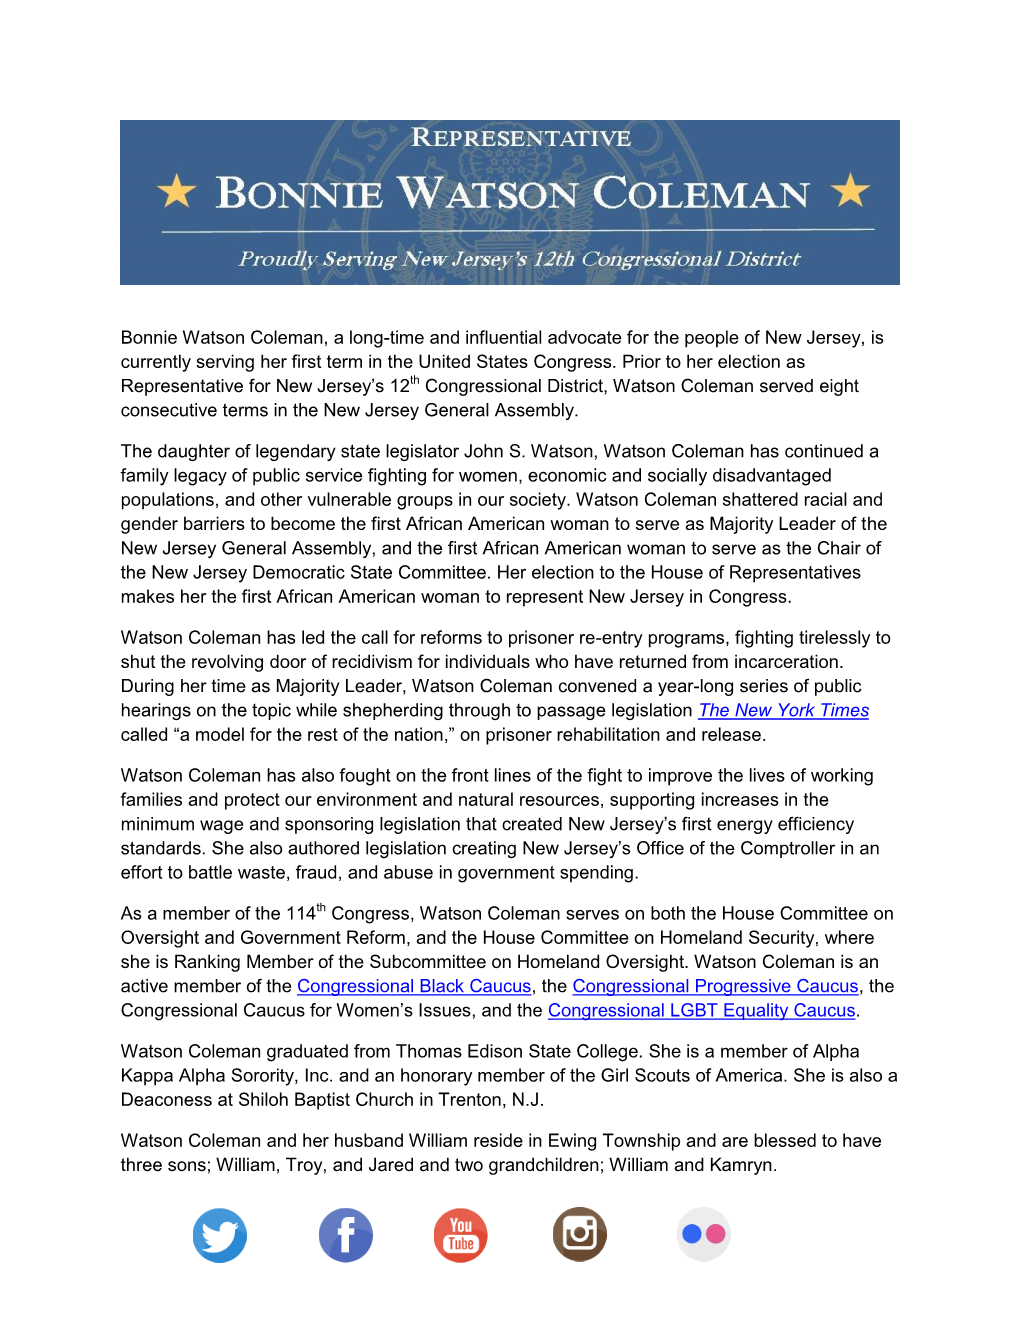 Bonnie Watson Coleman, a Long-Time and Influential Advocate for the People of New Jersey, Is Currently Serving Her First Term in the United States Congress